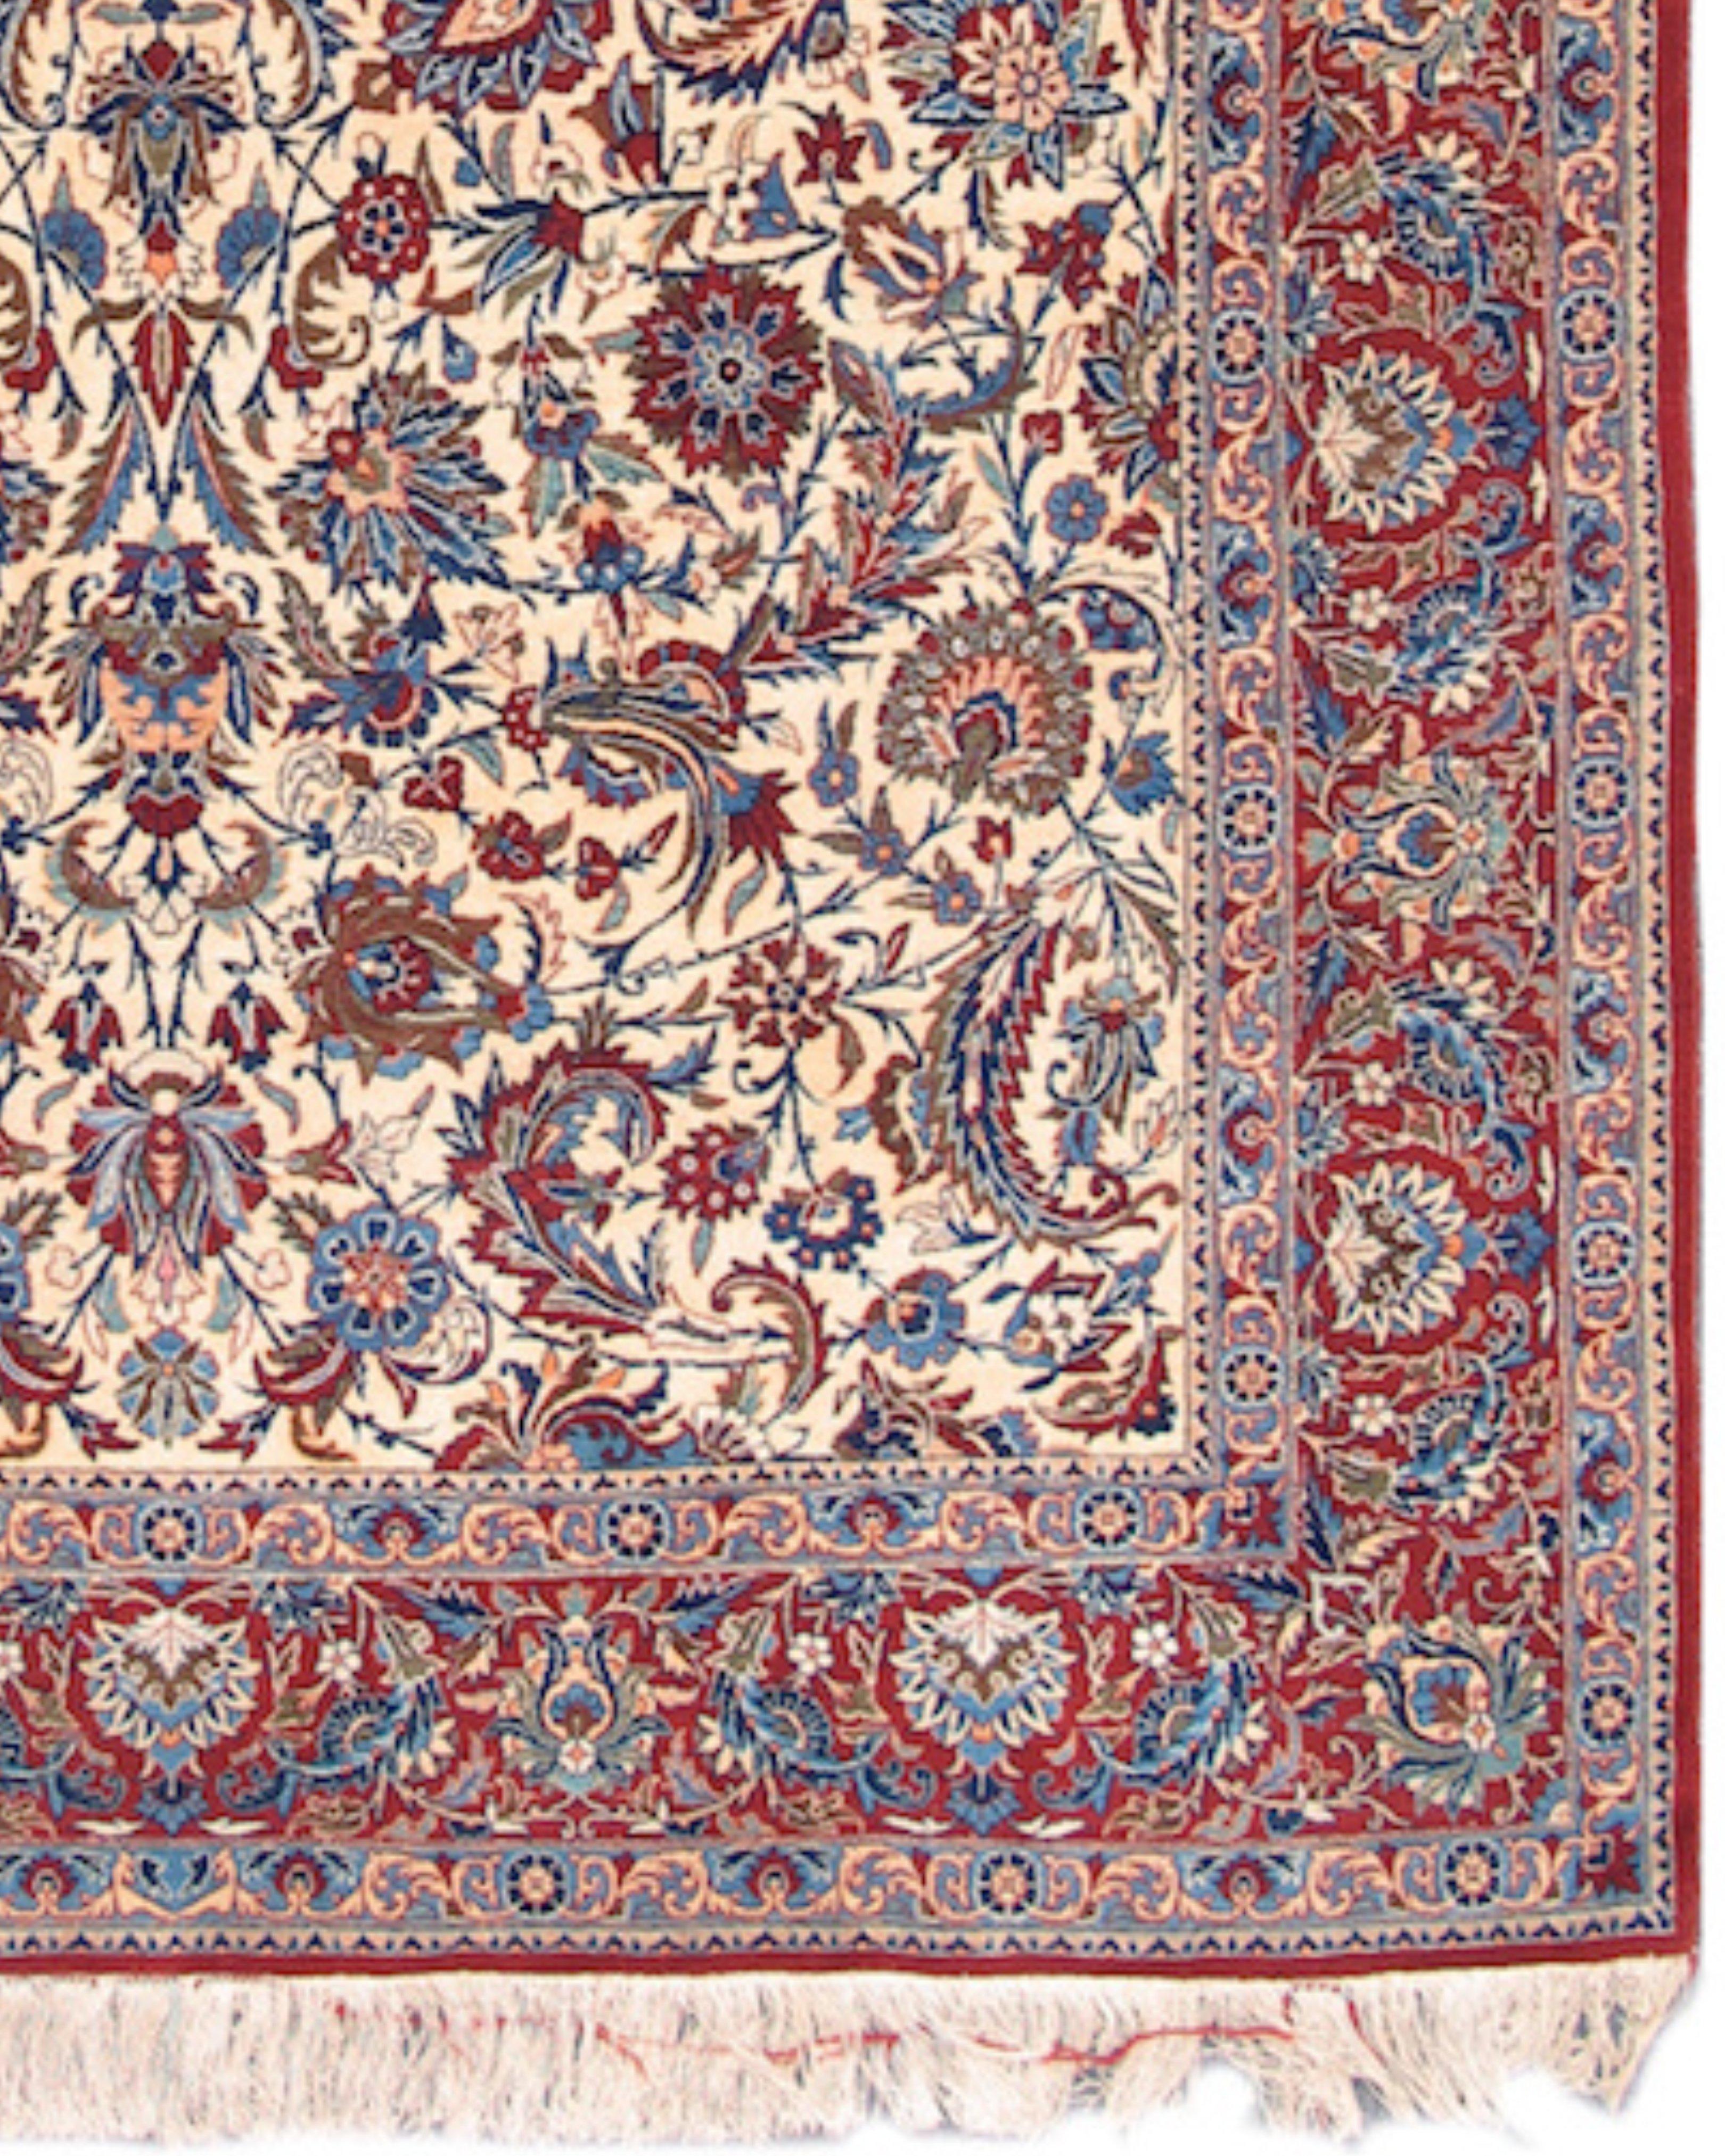 Persian Silk Isfahan Rug, Mid-20th Century

Silk foundation. 600 knots per square inch.

Additional information:
Dimensions: 4'10